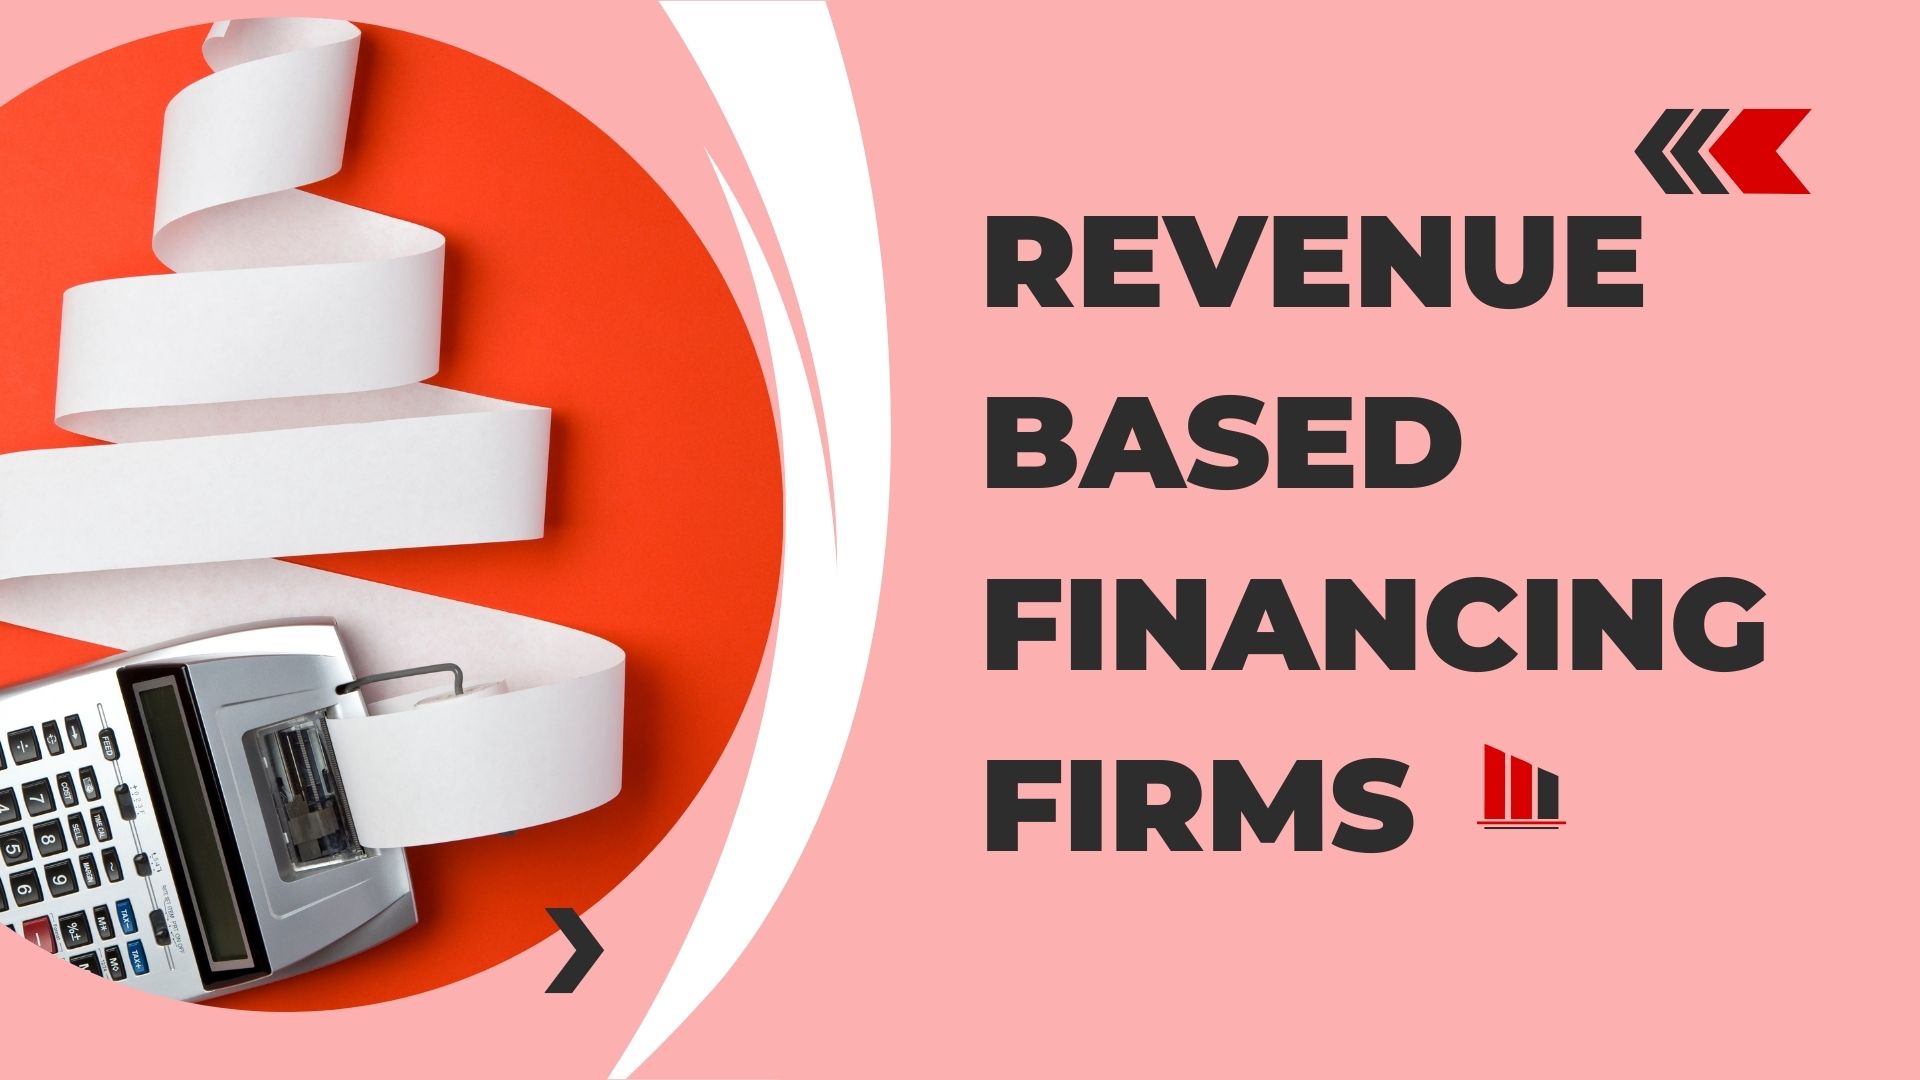 Revenue Based Financing Firms